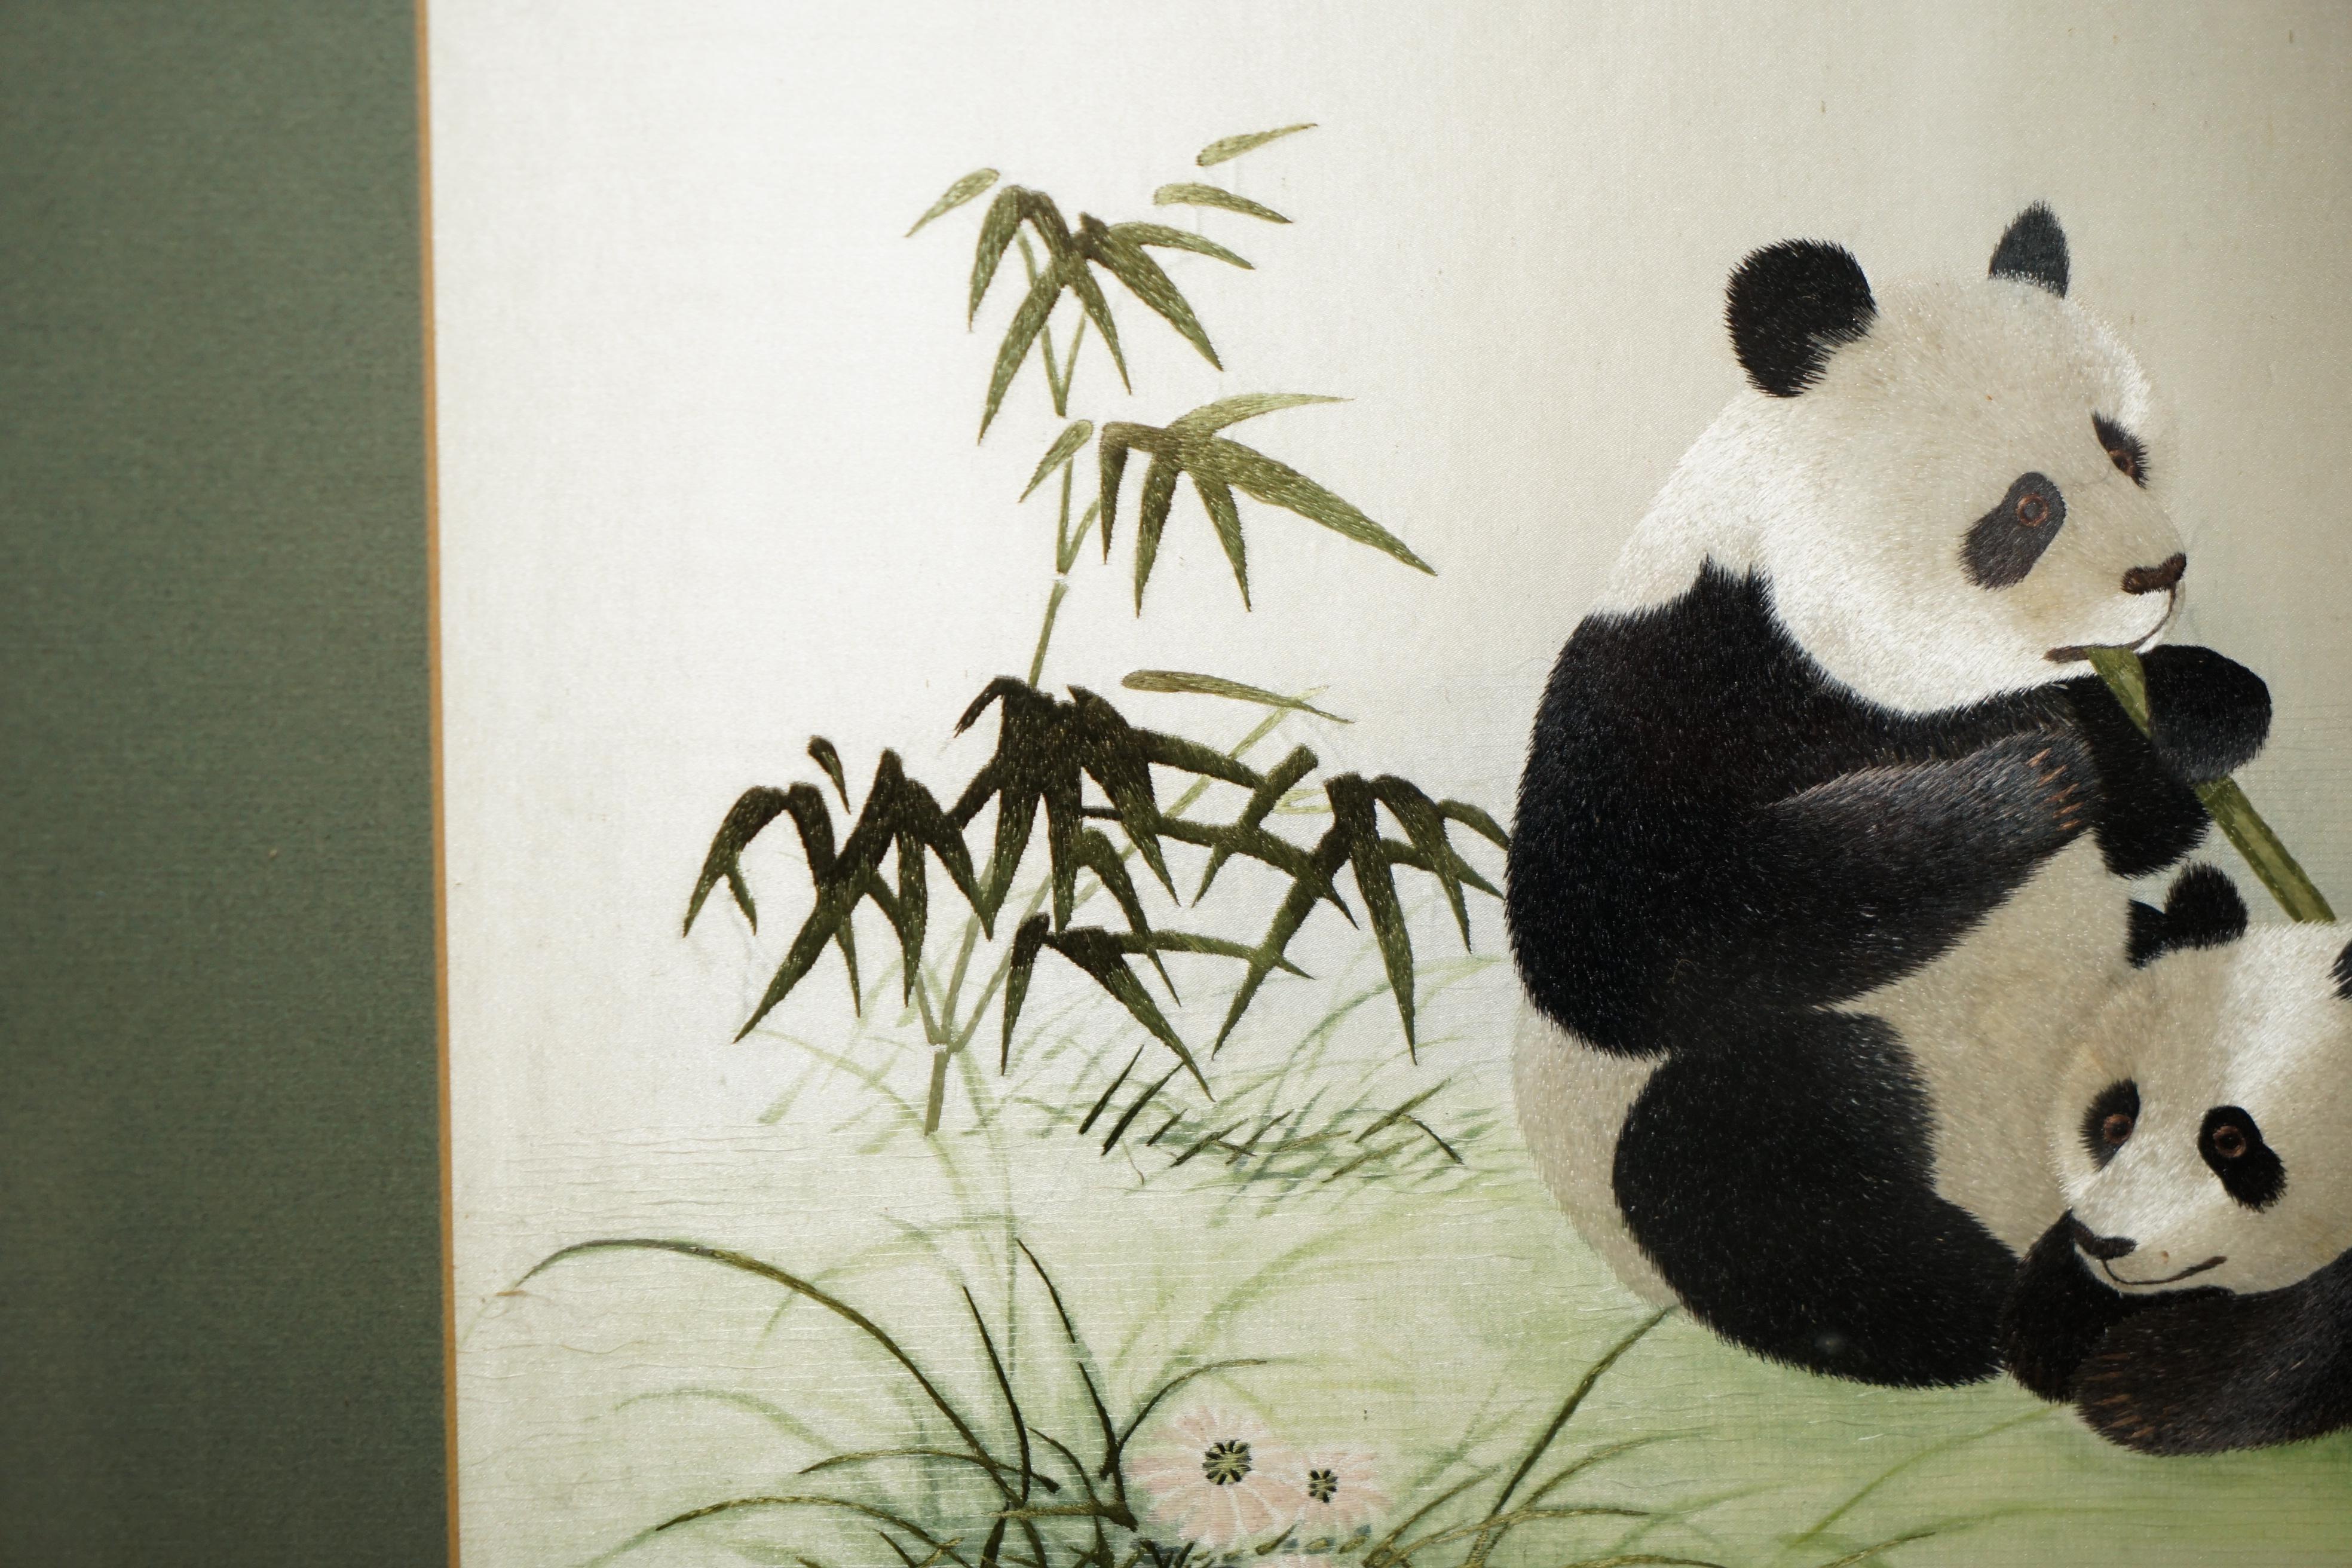 Chinois TAPEStry ViNTAGE CHINESE SILK EMBROIDERED DÉpicANT PANDAS HAVING fun IN FOREST en vente